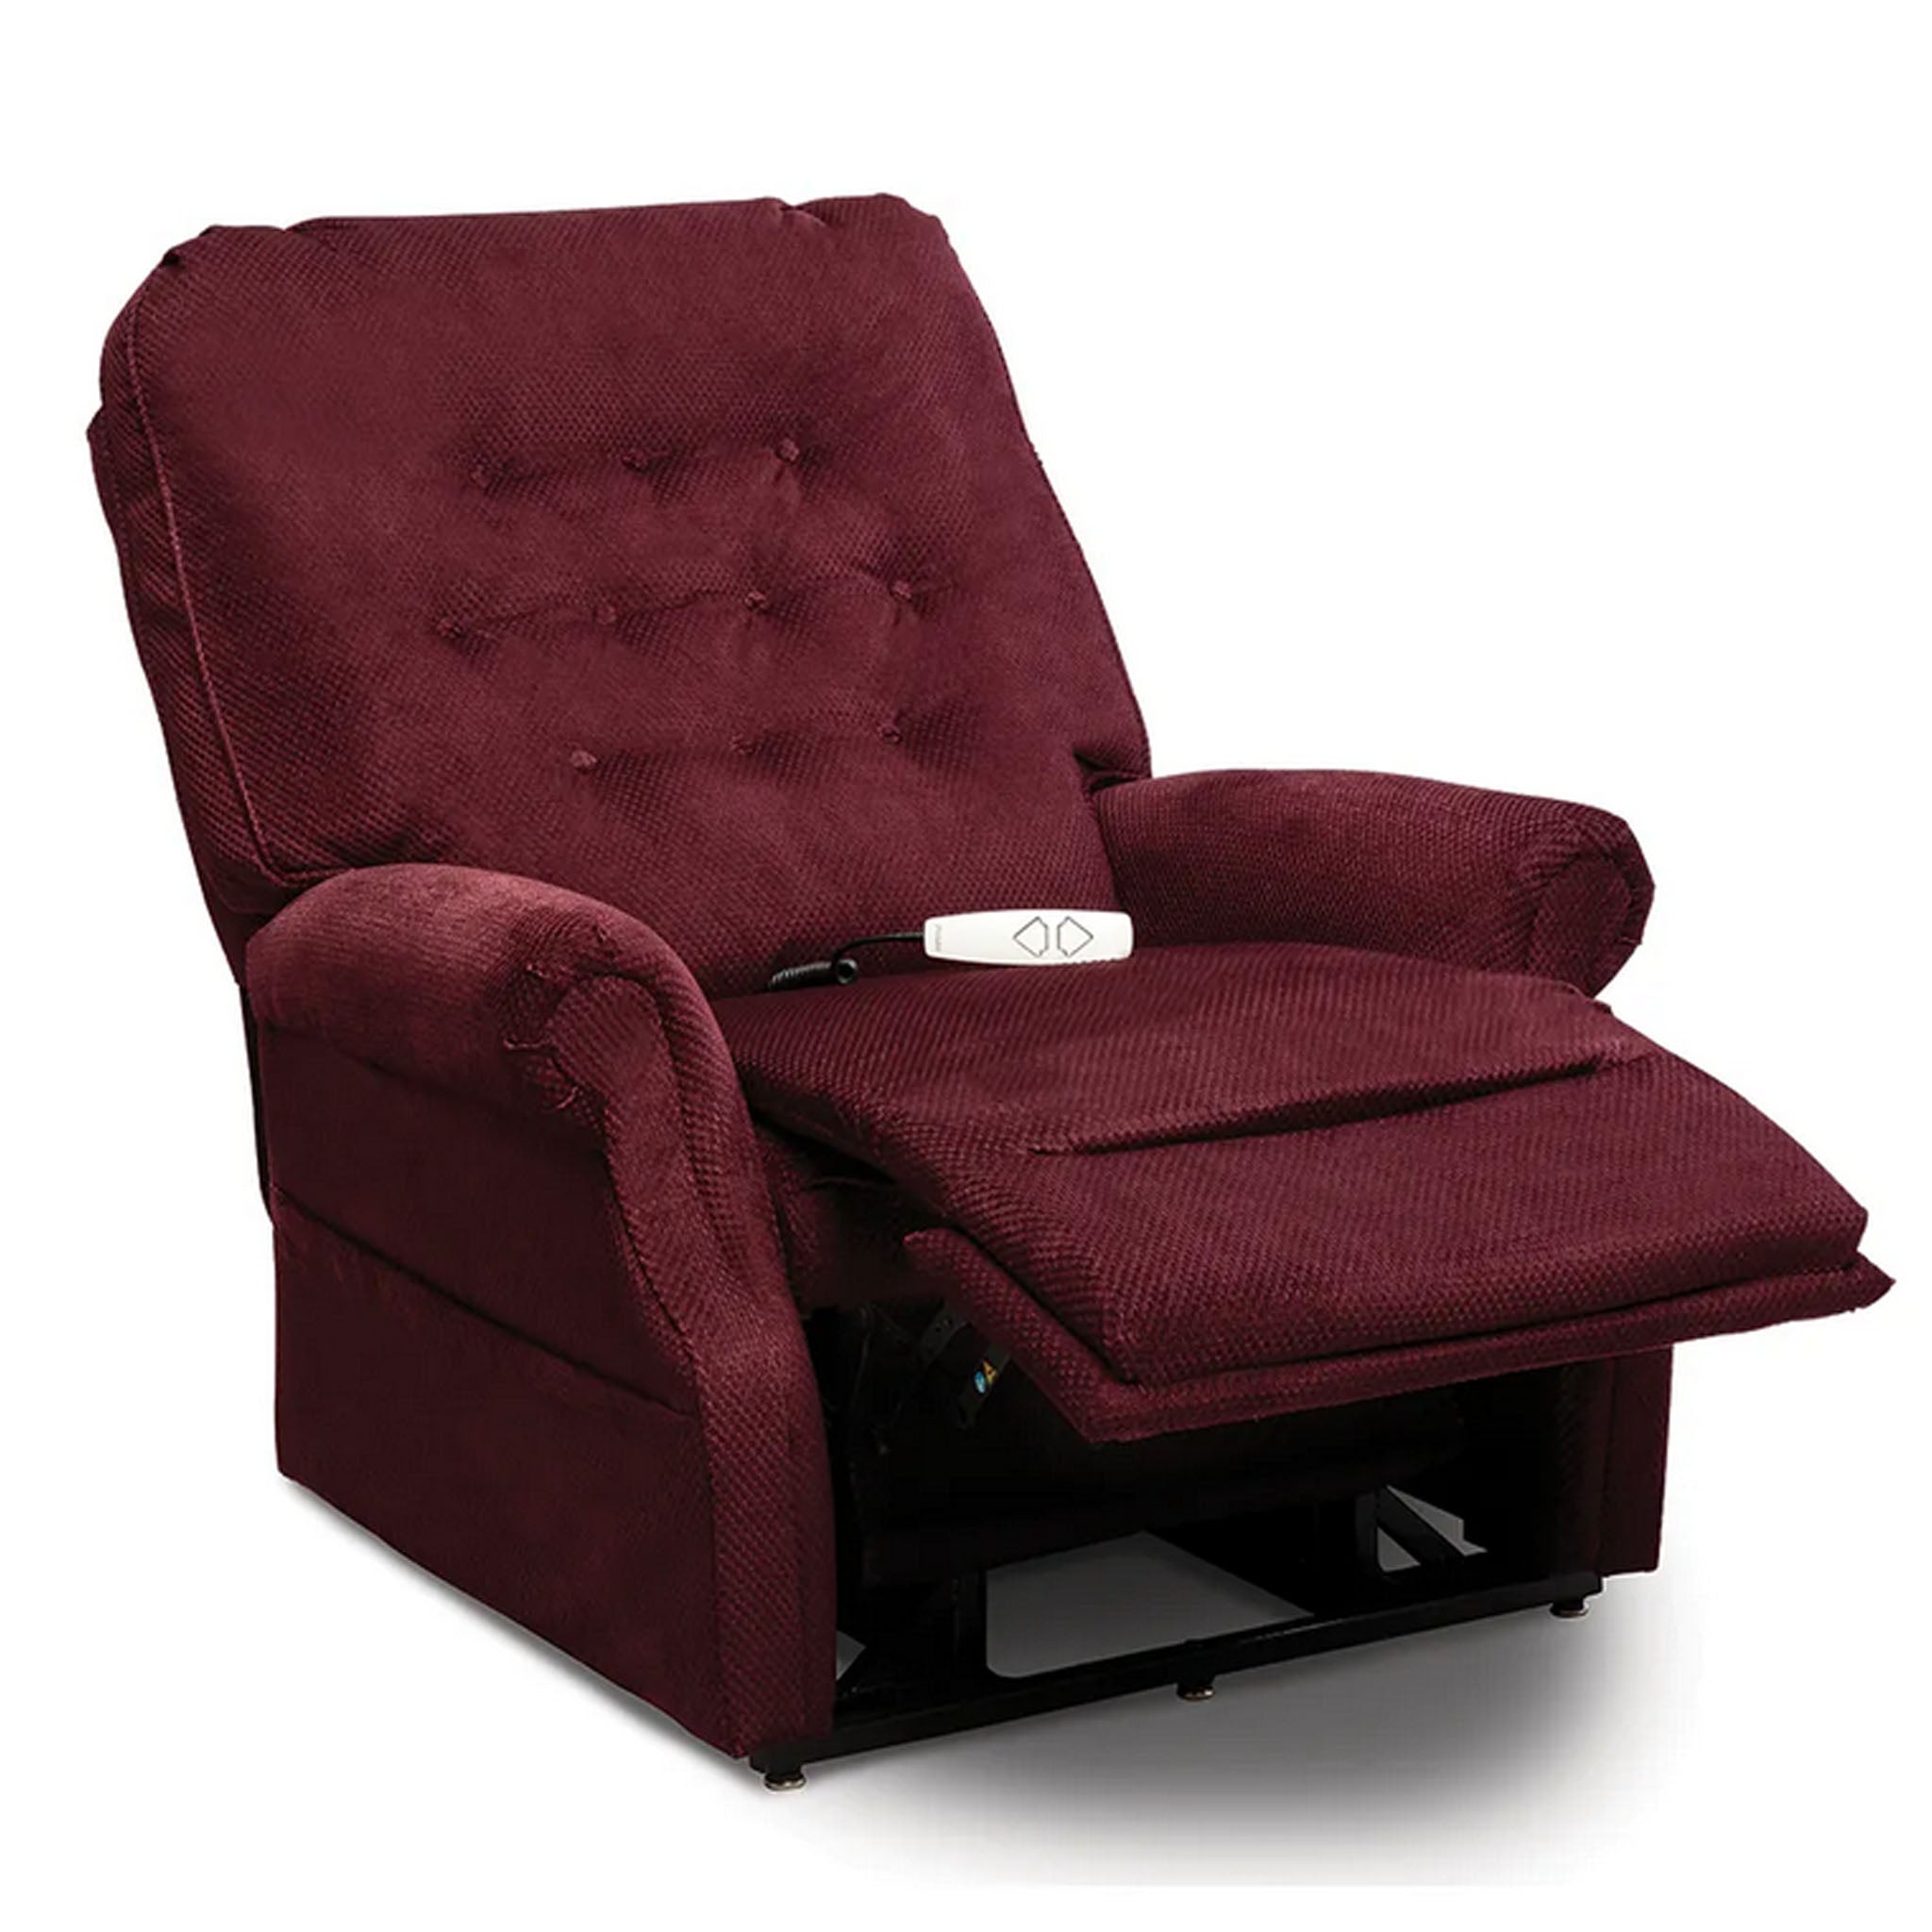 Pride Mobility Heritage Collection Power Lift Recliner LC-358XL